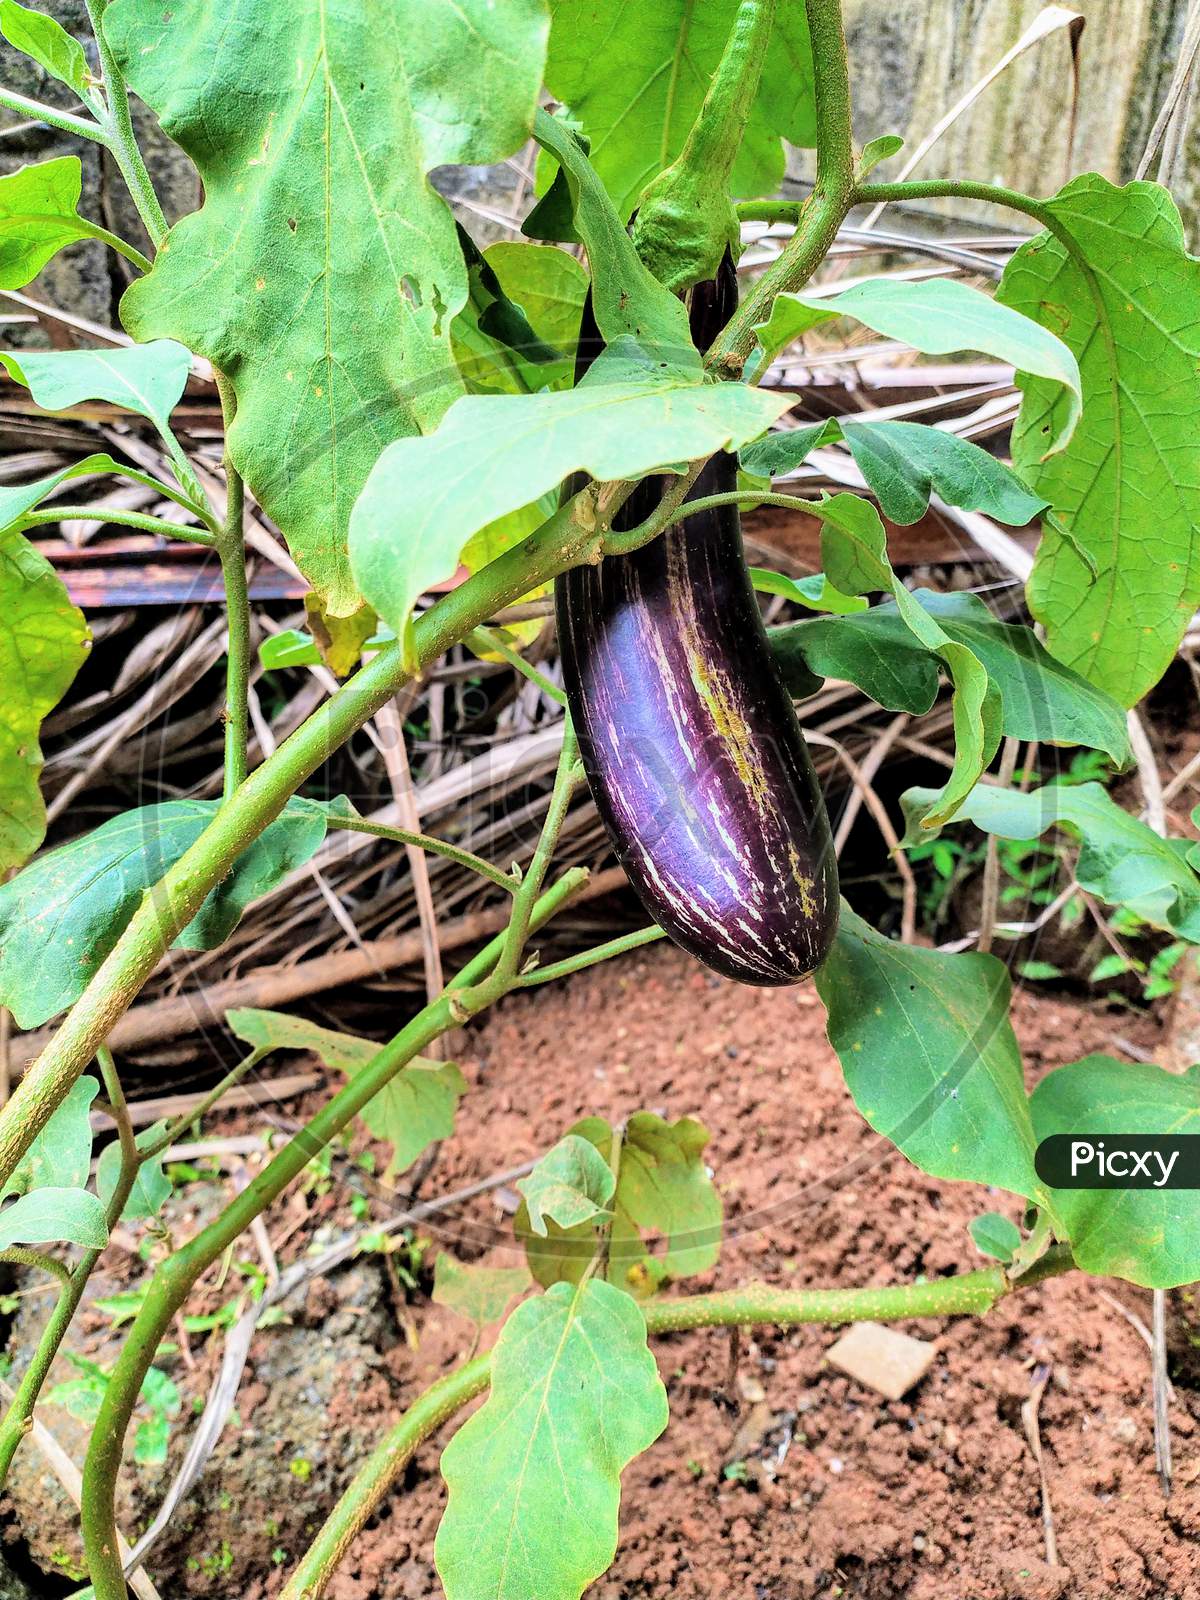 Brinjal(Eggplant) Is Hanging By Its Root